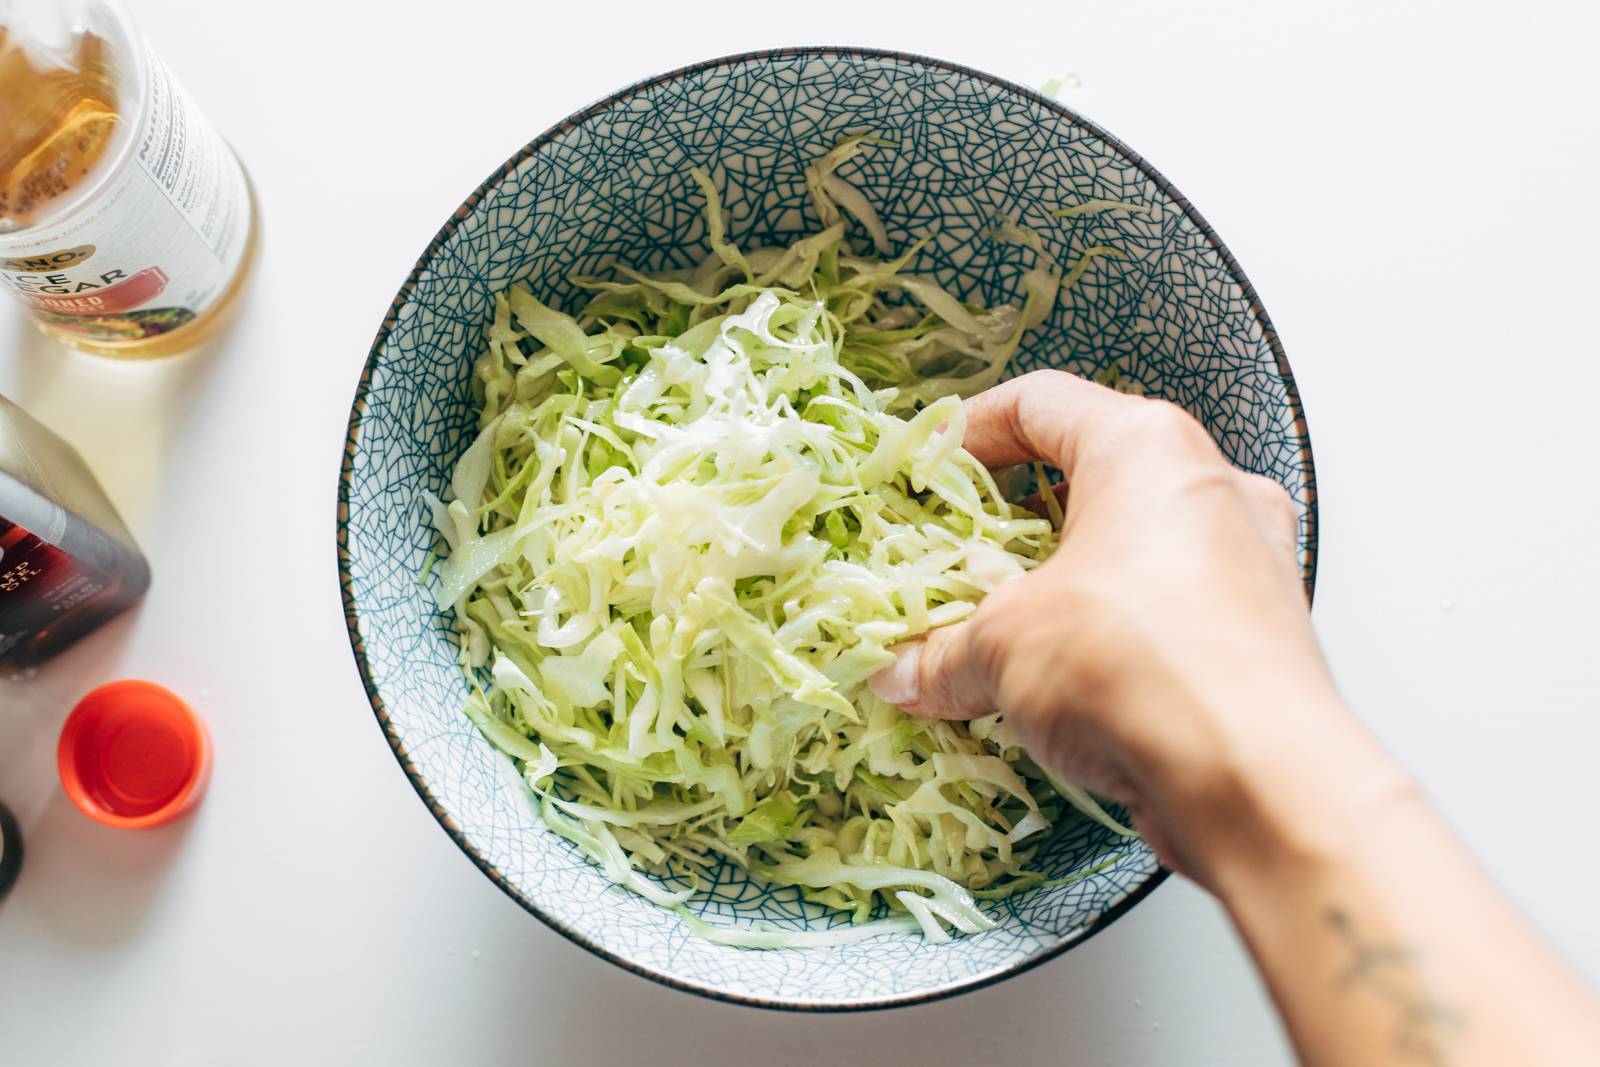 Mixing shredded coleslaw with hands.